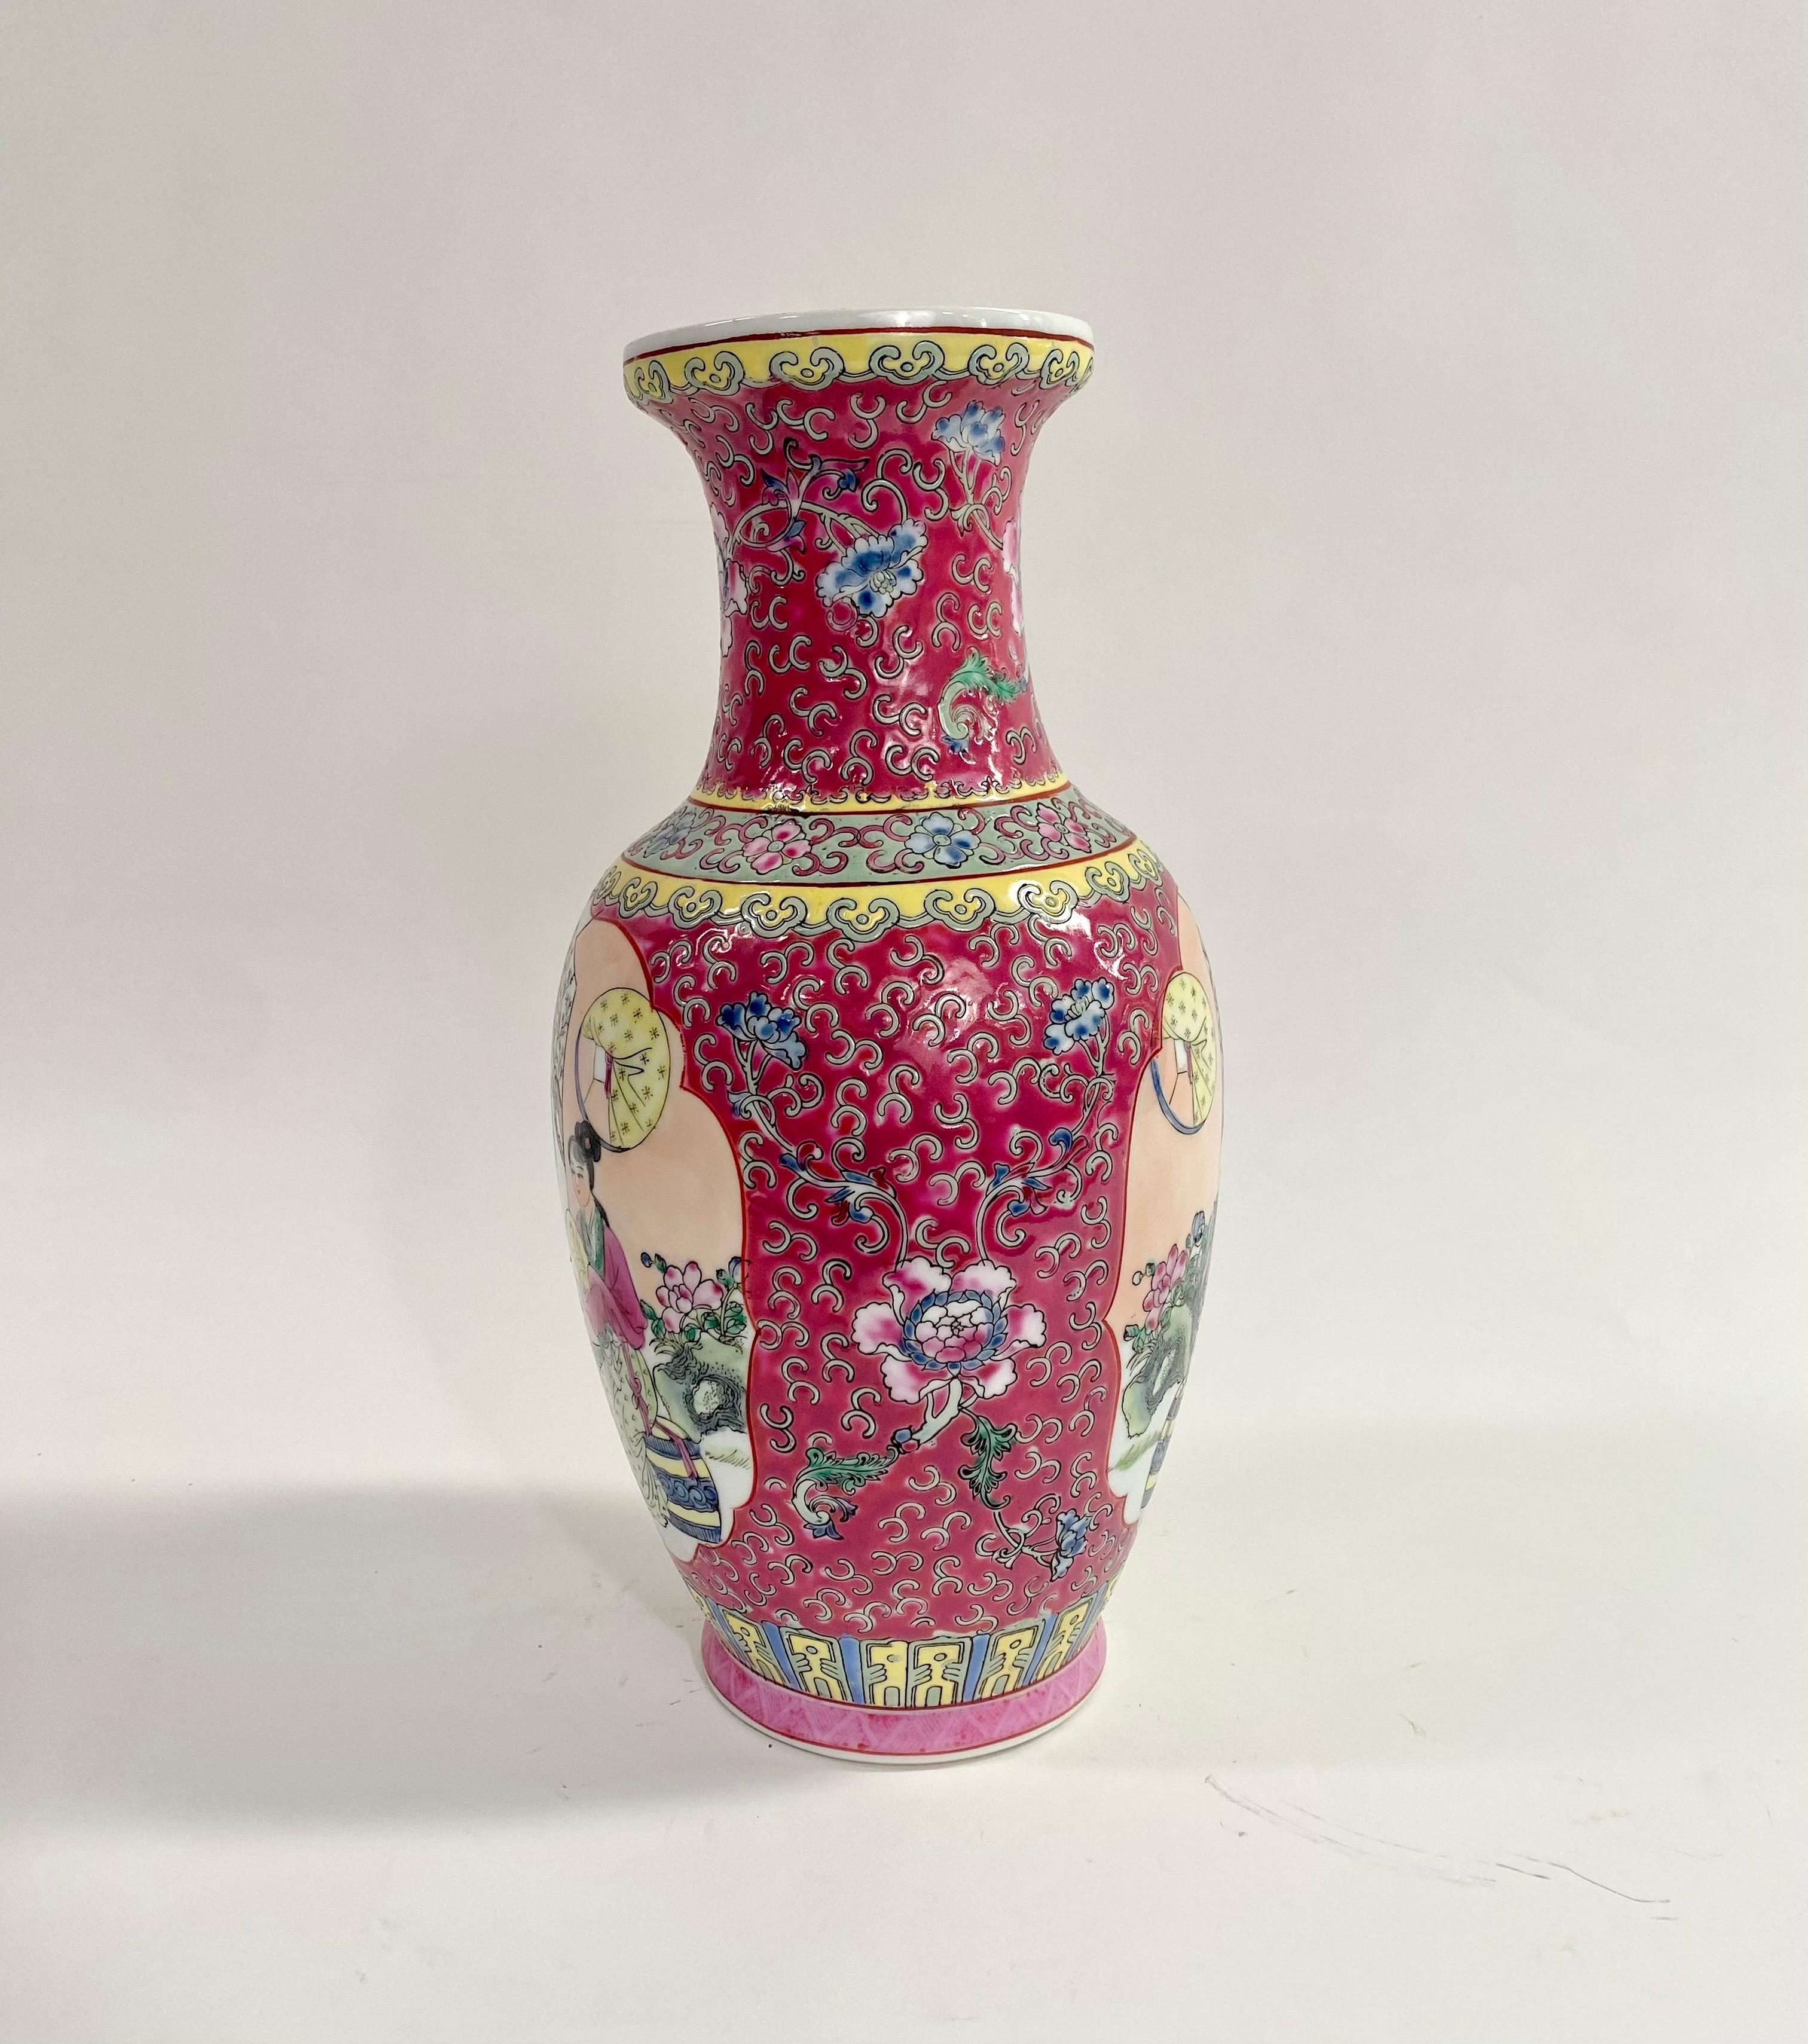 A vintage oriental Chinese export ceramic vase. The hand-painted vase depicts a scene of Three Asian women enjoying their time in a beautiful garden. The vase feature a vivid pink color background with green and yellow motifs making it standout. The